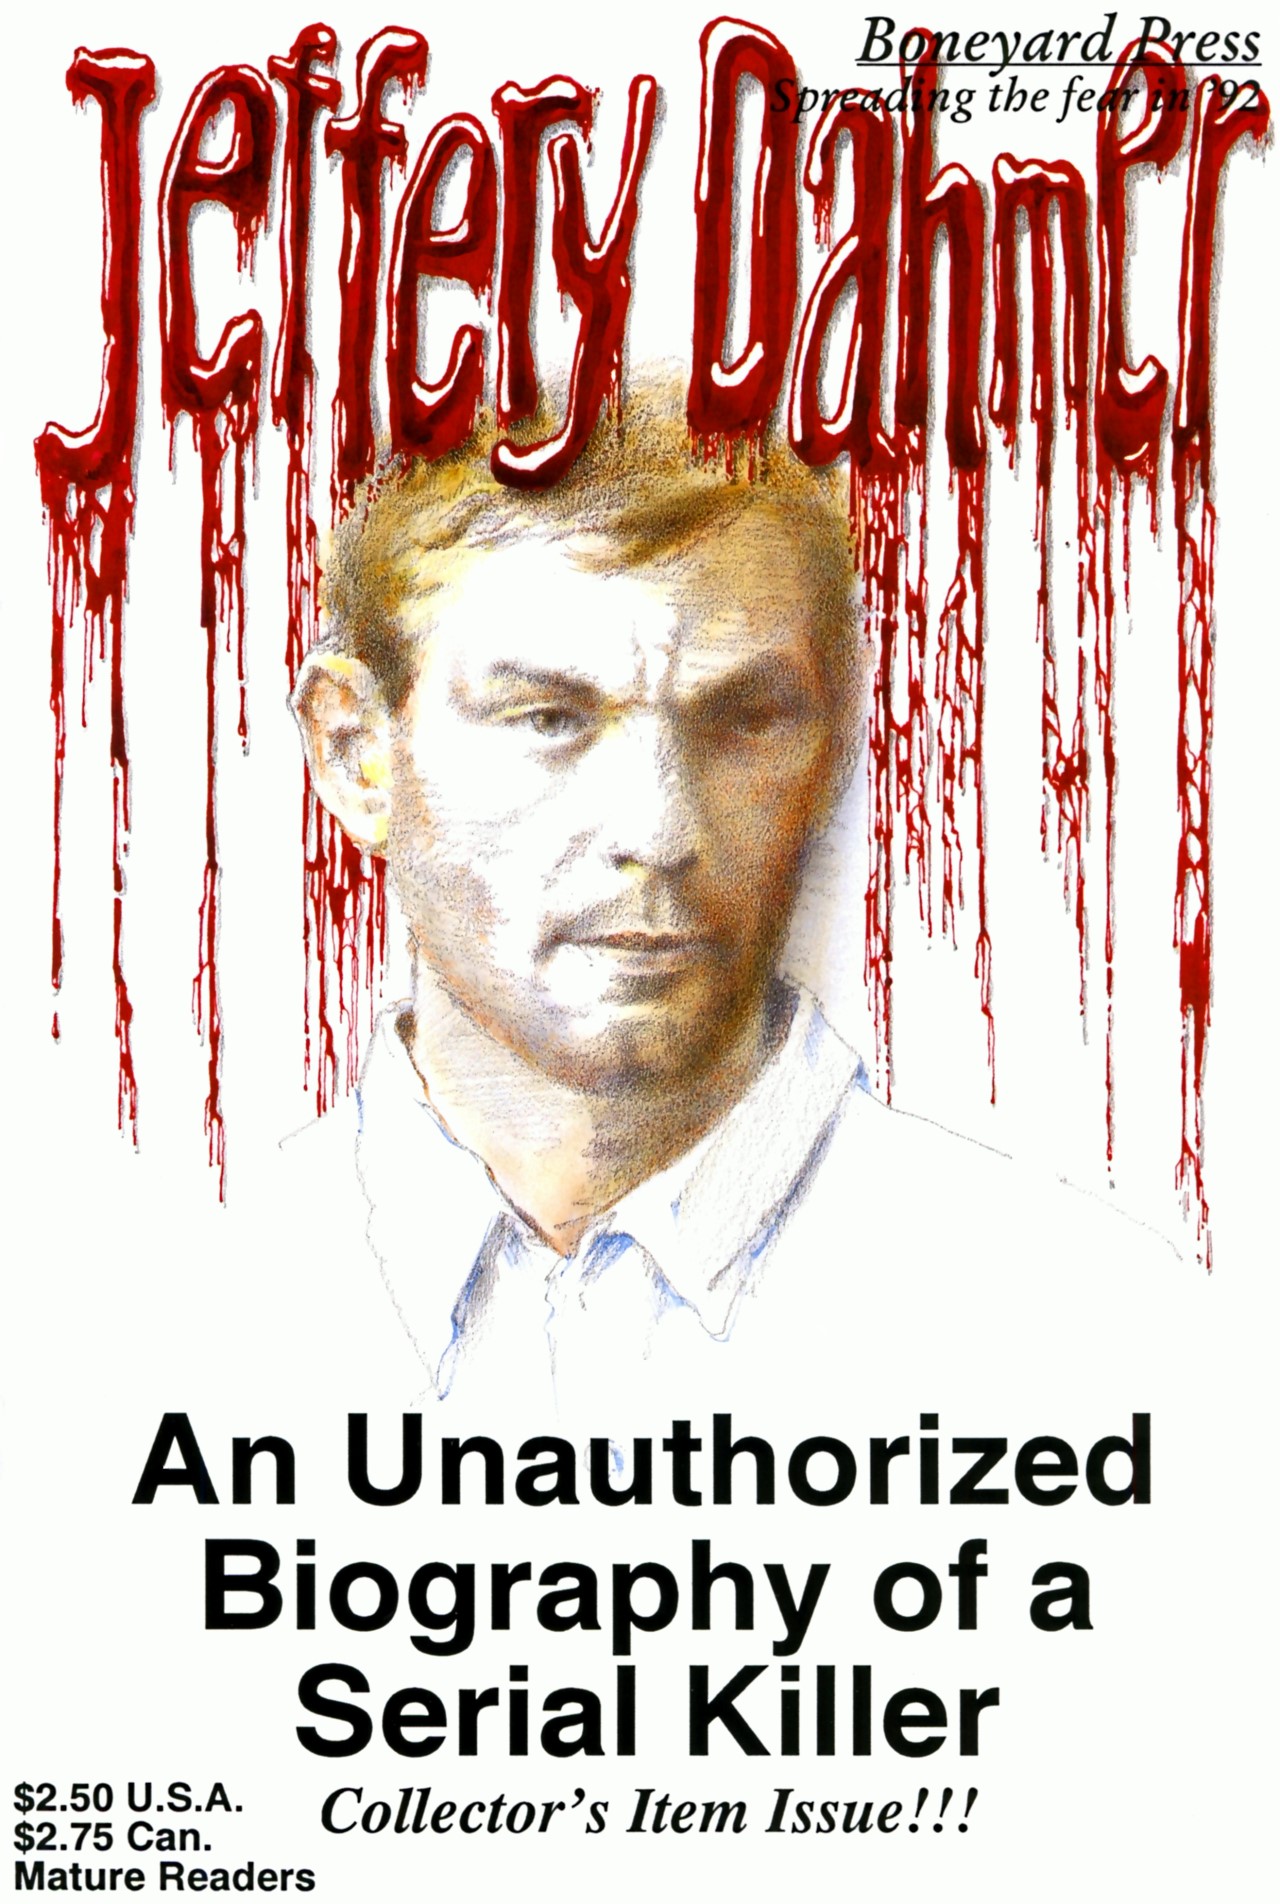 Read online Jeffery Dahmer: An Unauthorized Biography of a Serial Killer comic -  Issue # Full - 1